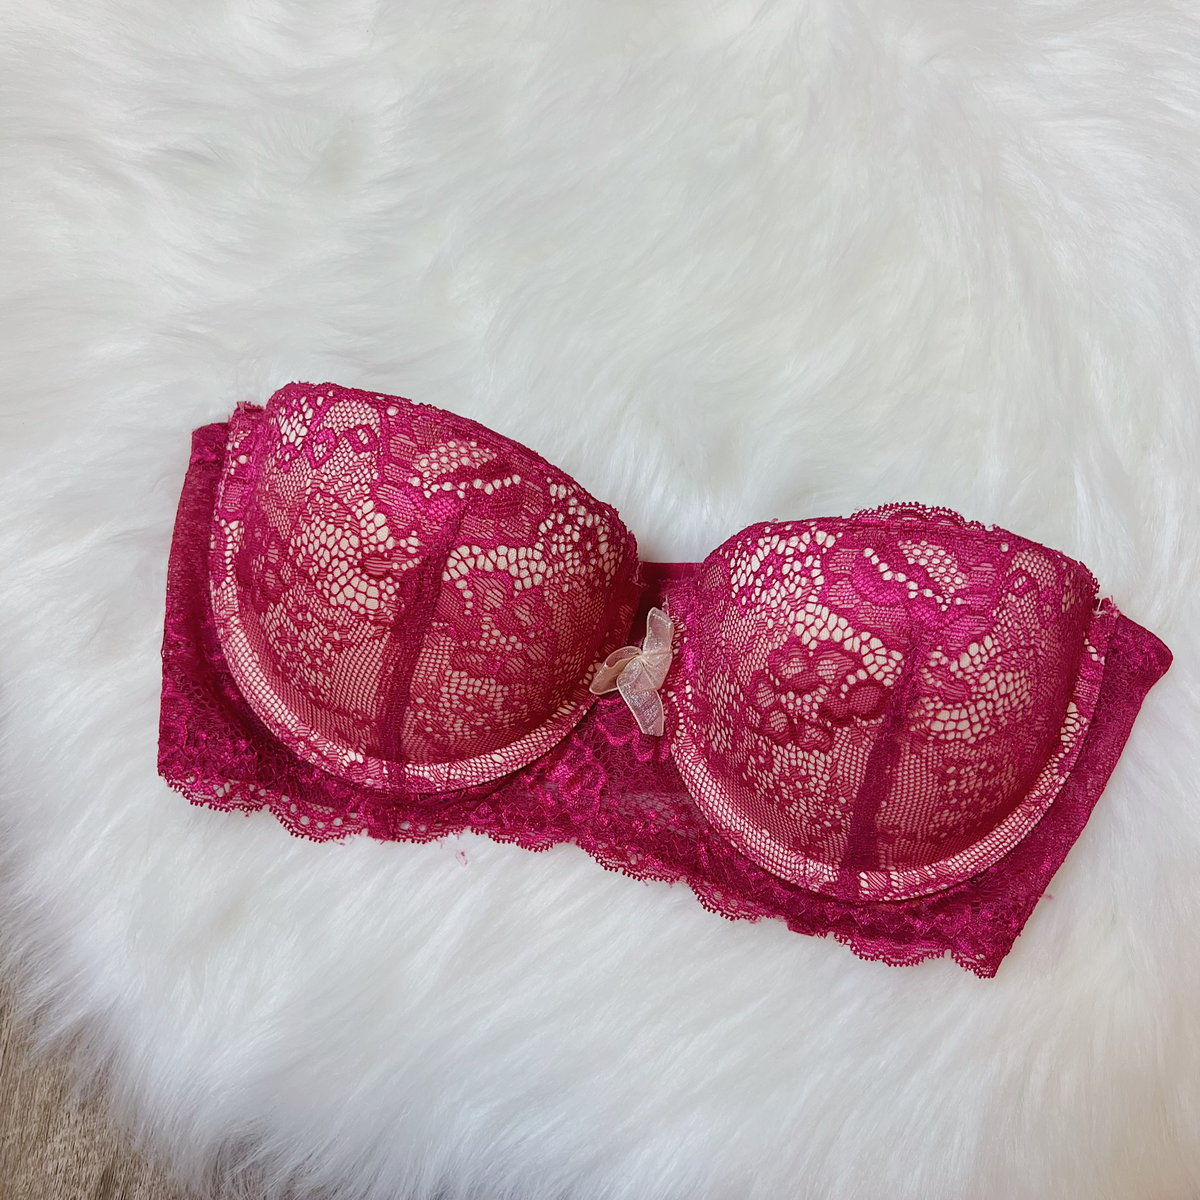 VERSACE UNDERWEAR Lace and Sequin Bra Size IT3C - 36C BNWT (RARE &  COLLECTABLE) 8058334047743 on eBid United States